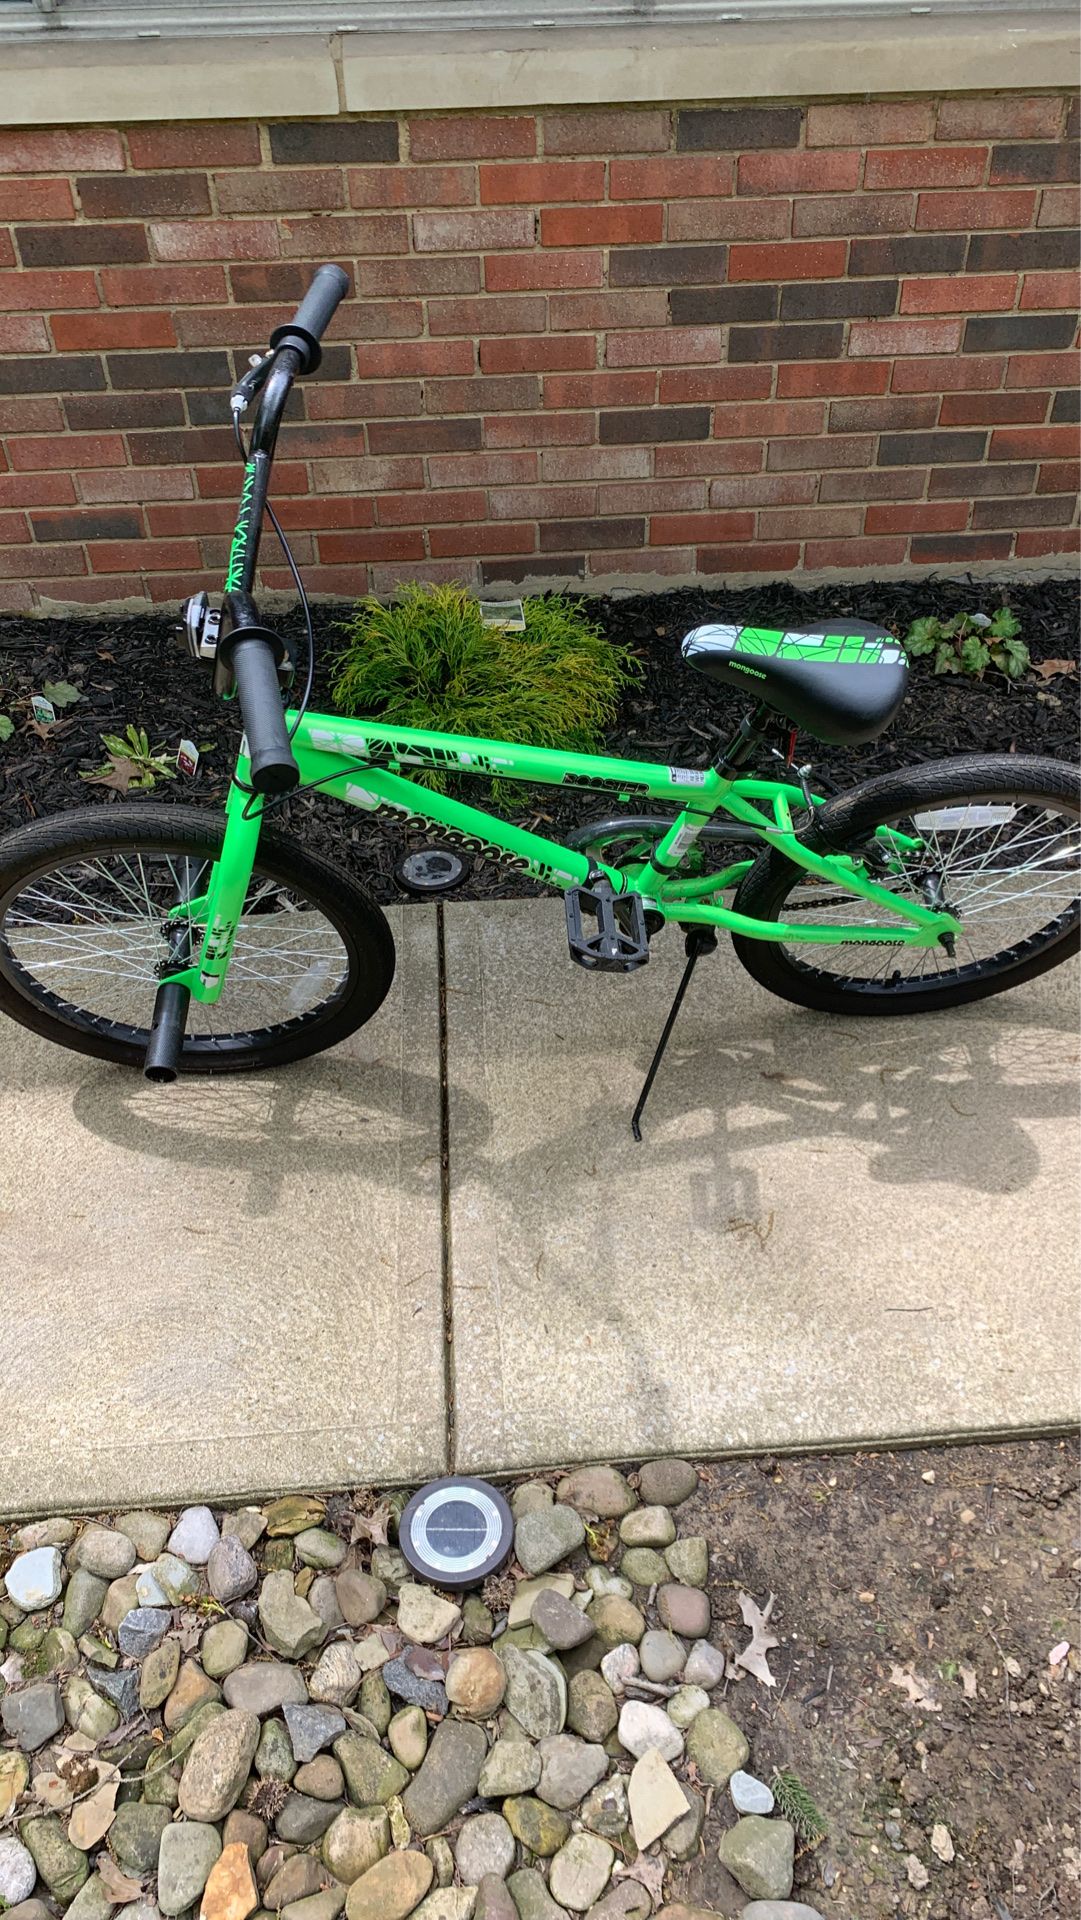 Boys 20” Mongoose Mountain bike with front pegs